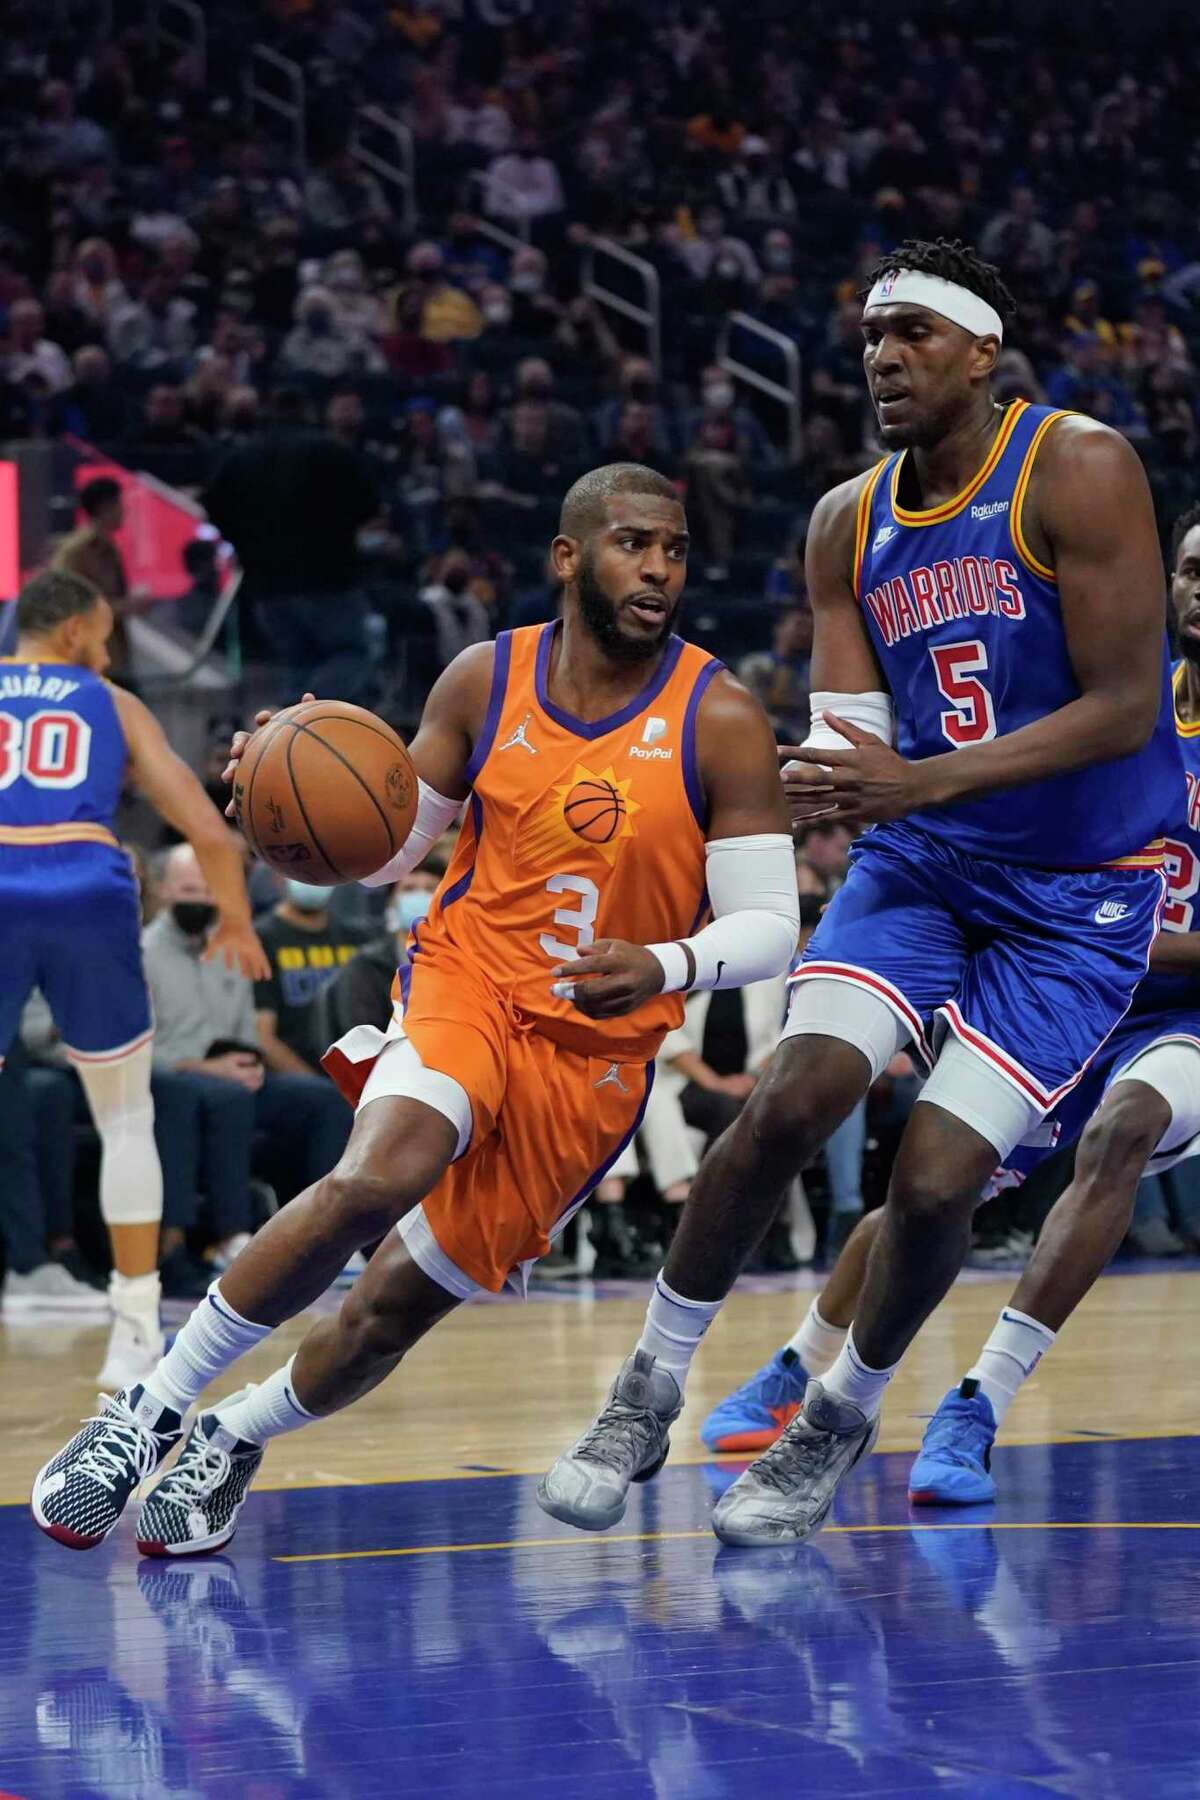 Phoenix Suns guard Chris Paul (3) drives to the basket against Golden State Warriors center Kevon Looney (5) during an NBA basketball game in San Francisco, Friday, Dec. 3, 2021. (AP Photo/Jeff Chiu)